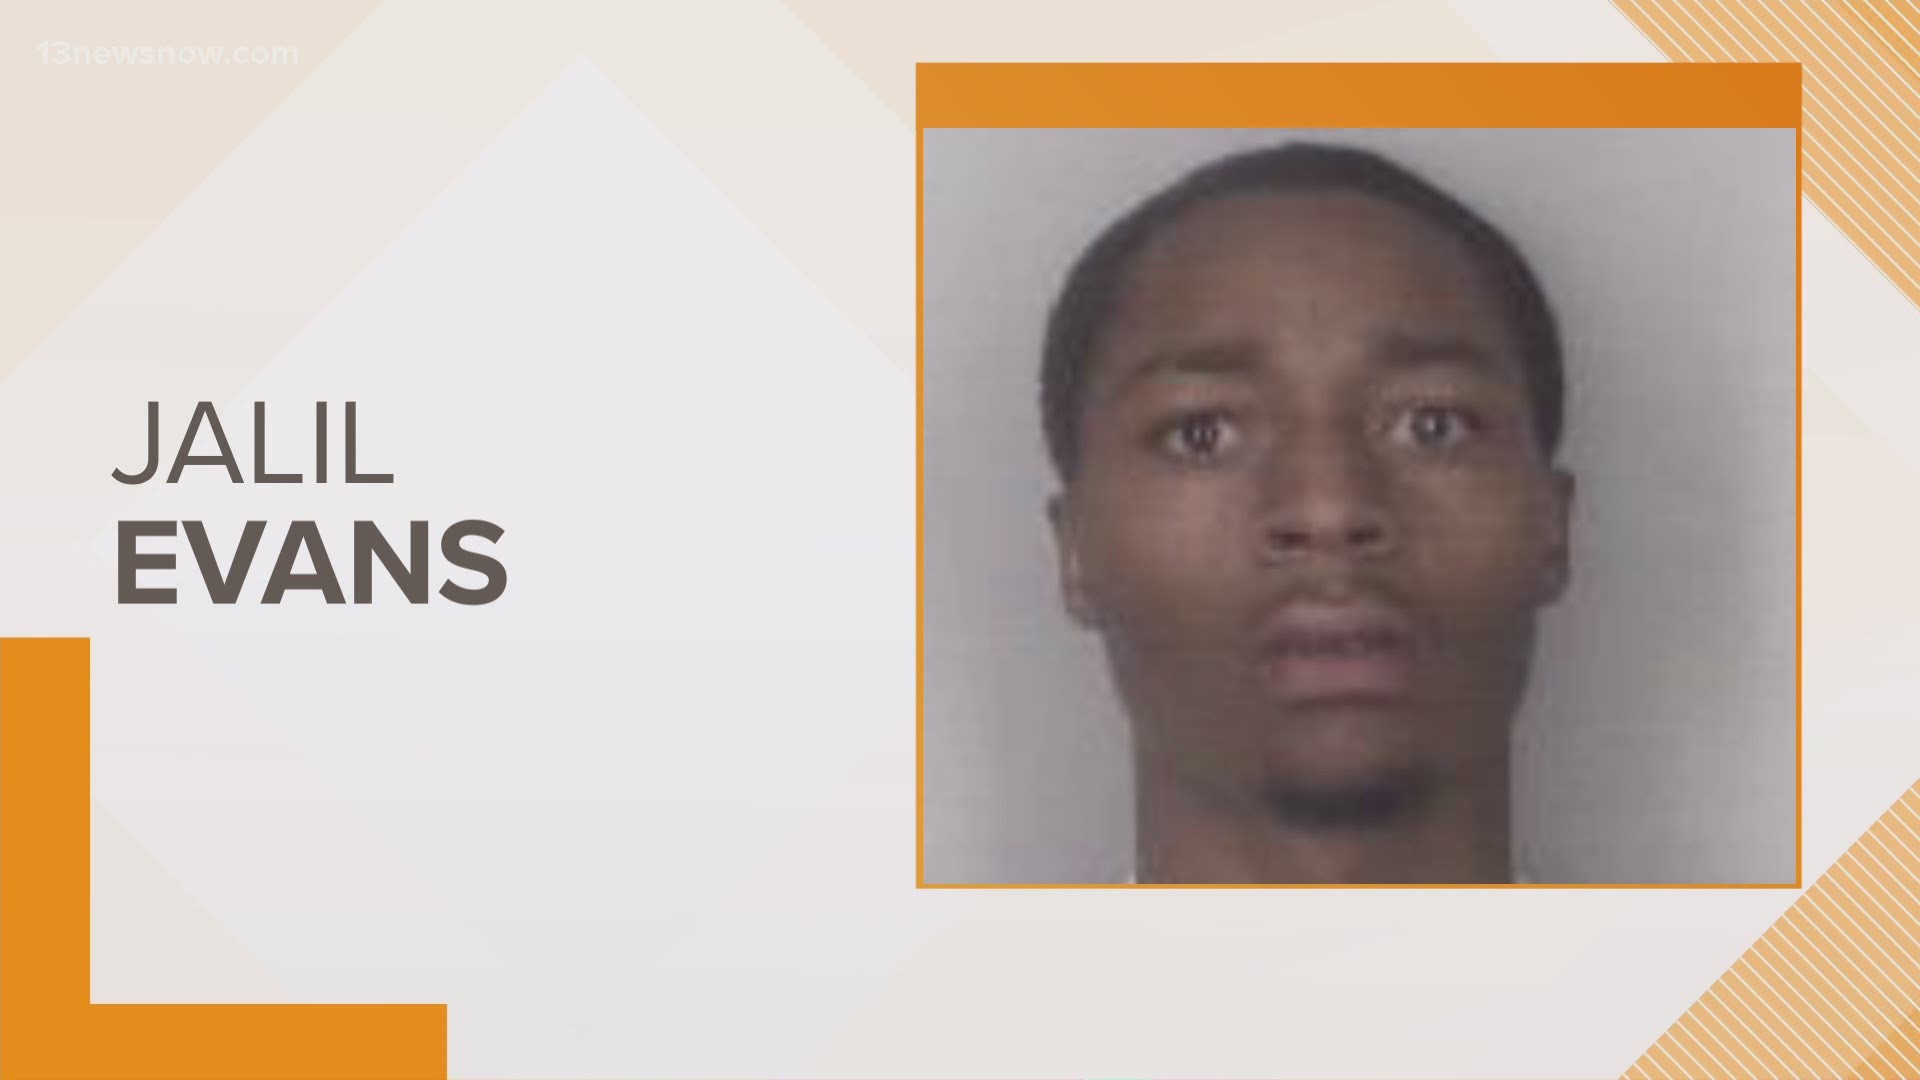 Portsmouth police are searching for 22-year-old Jalil L. Evans who is accused of shooting a woman in the back. He is considered armed and dangerous.